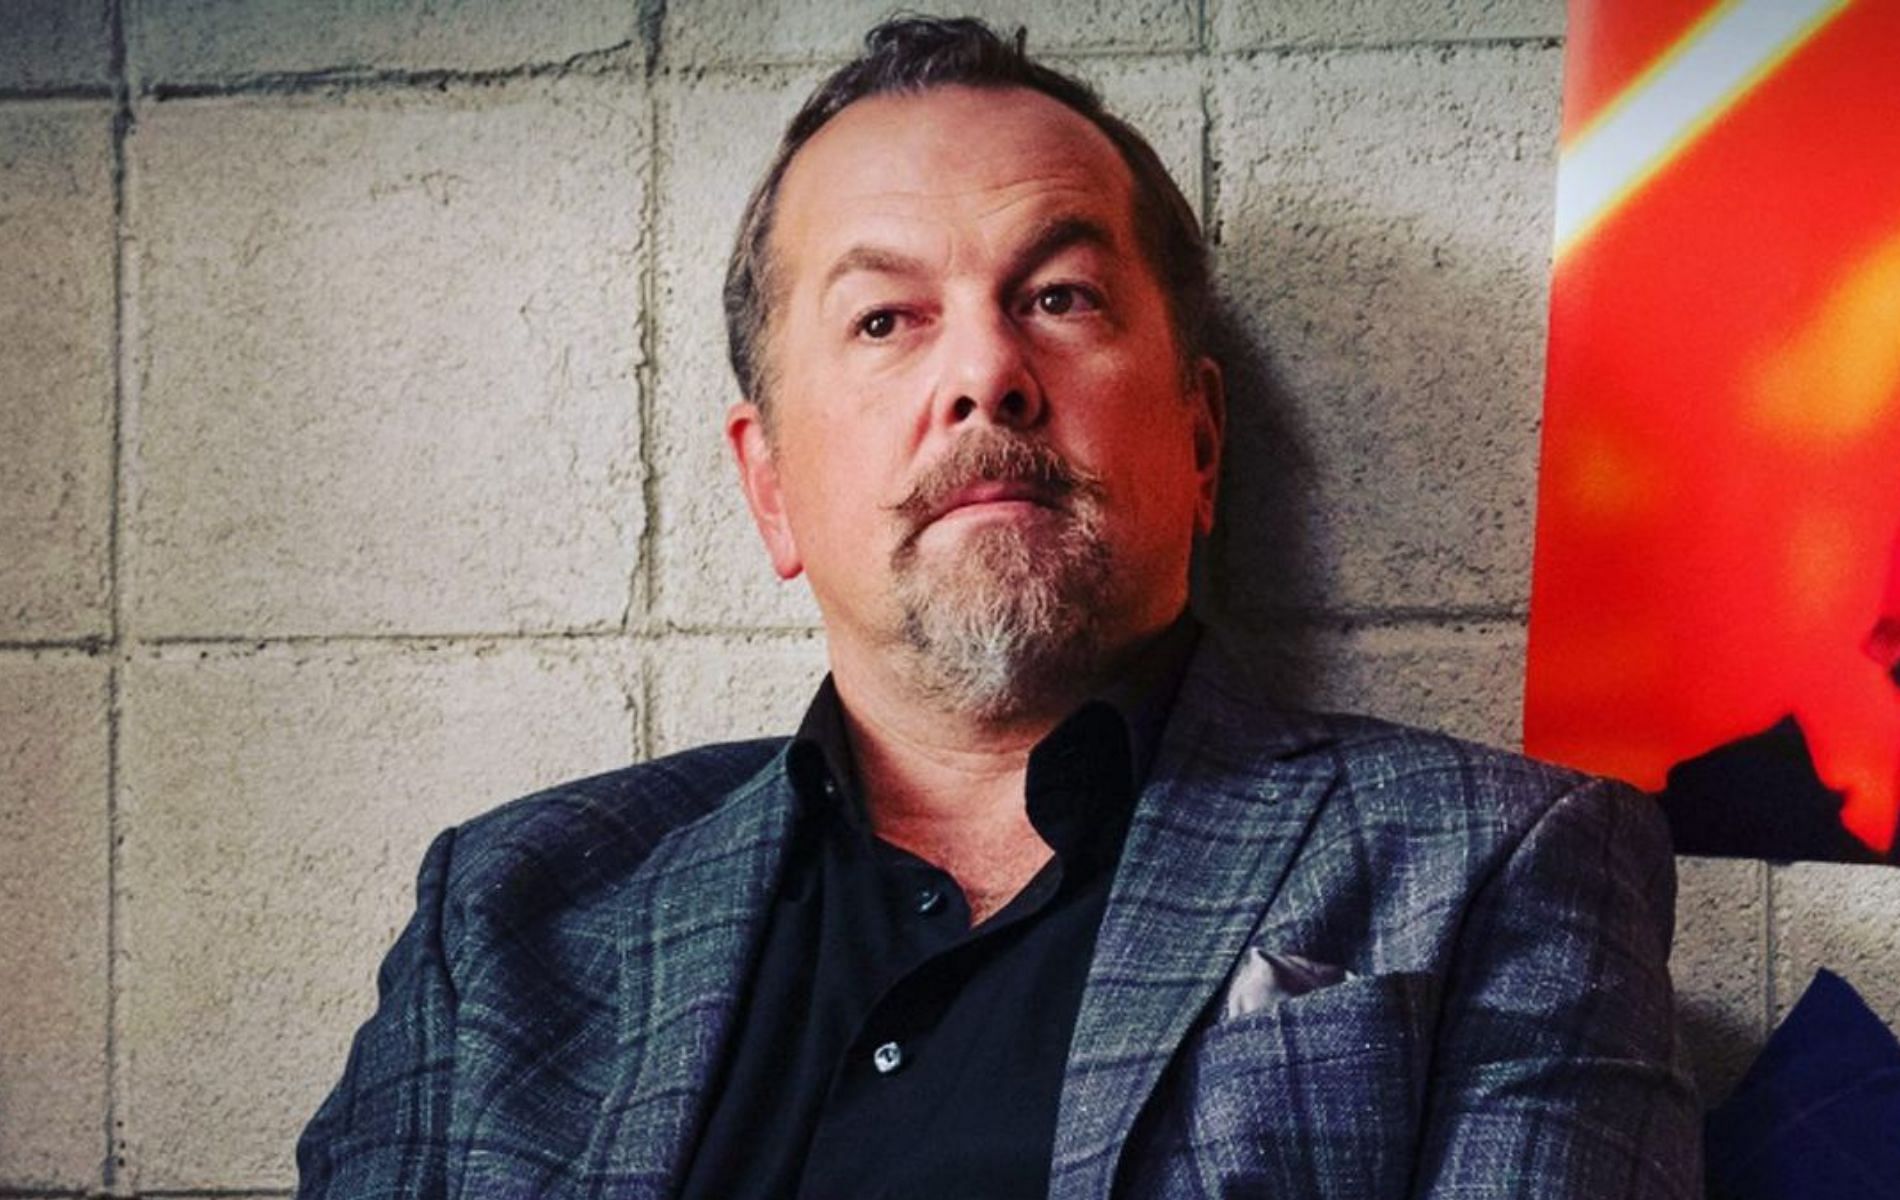 David Costabile as Mike &ldquo;Wags&rdquo; Wagner from &lsquo;Billions&#039; (Image via david_costabile/ Instagram)